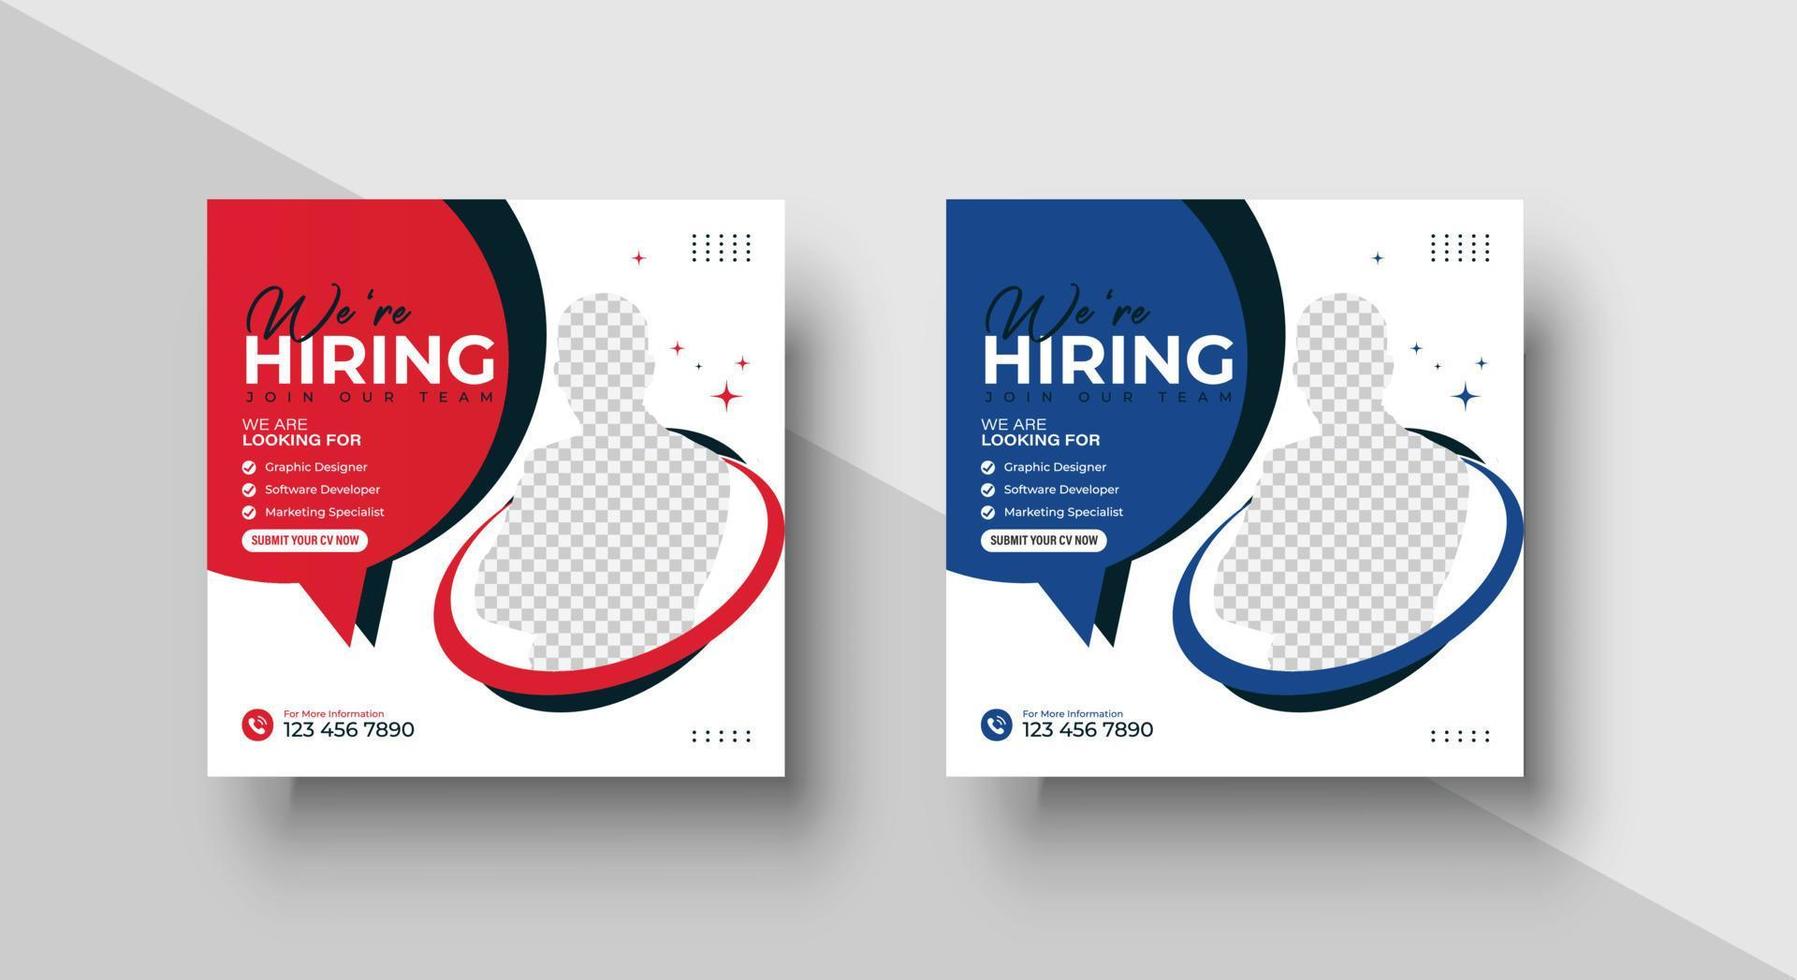 Poster for we are hiring. employees needed. Social media template job vacancy recruitment vector